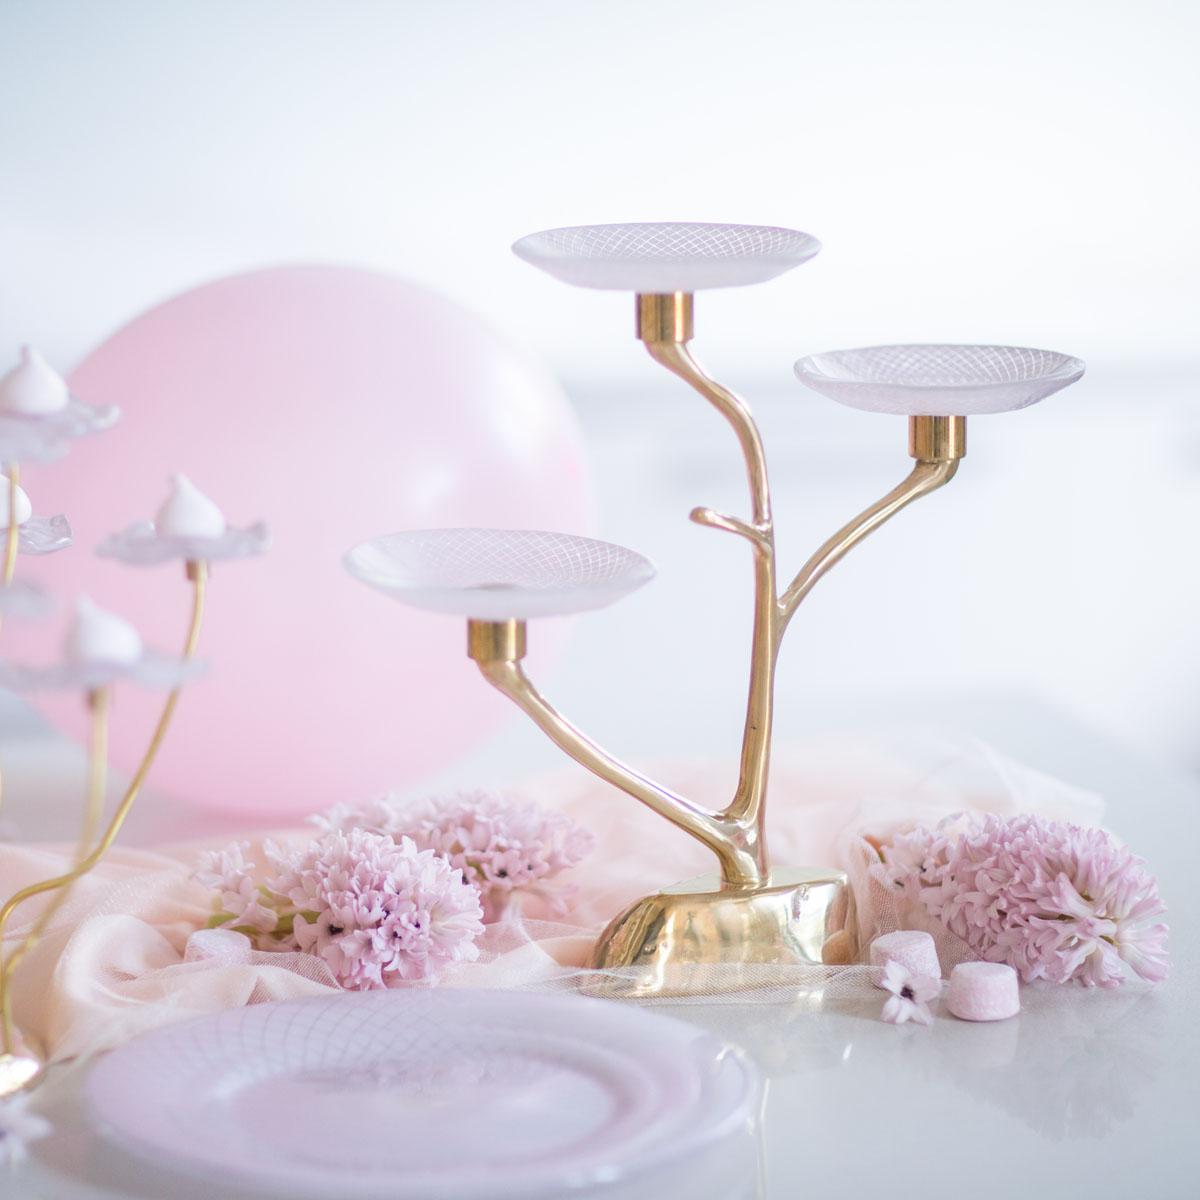 Pink 3-tiered cake stand with glass plates